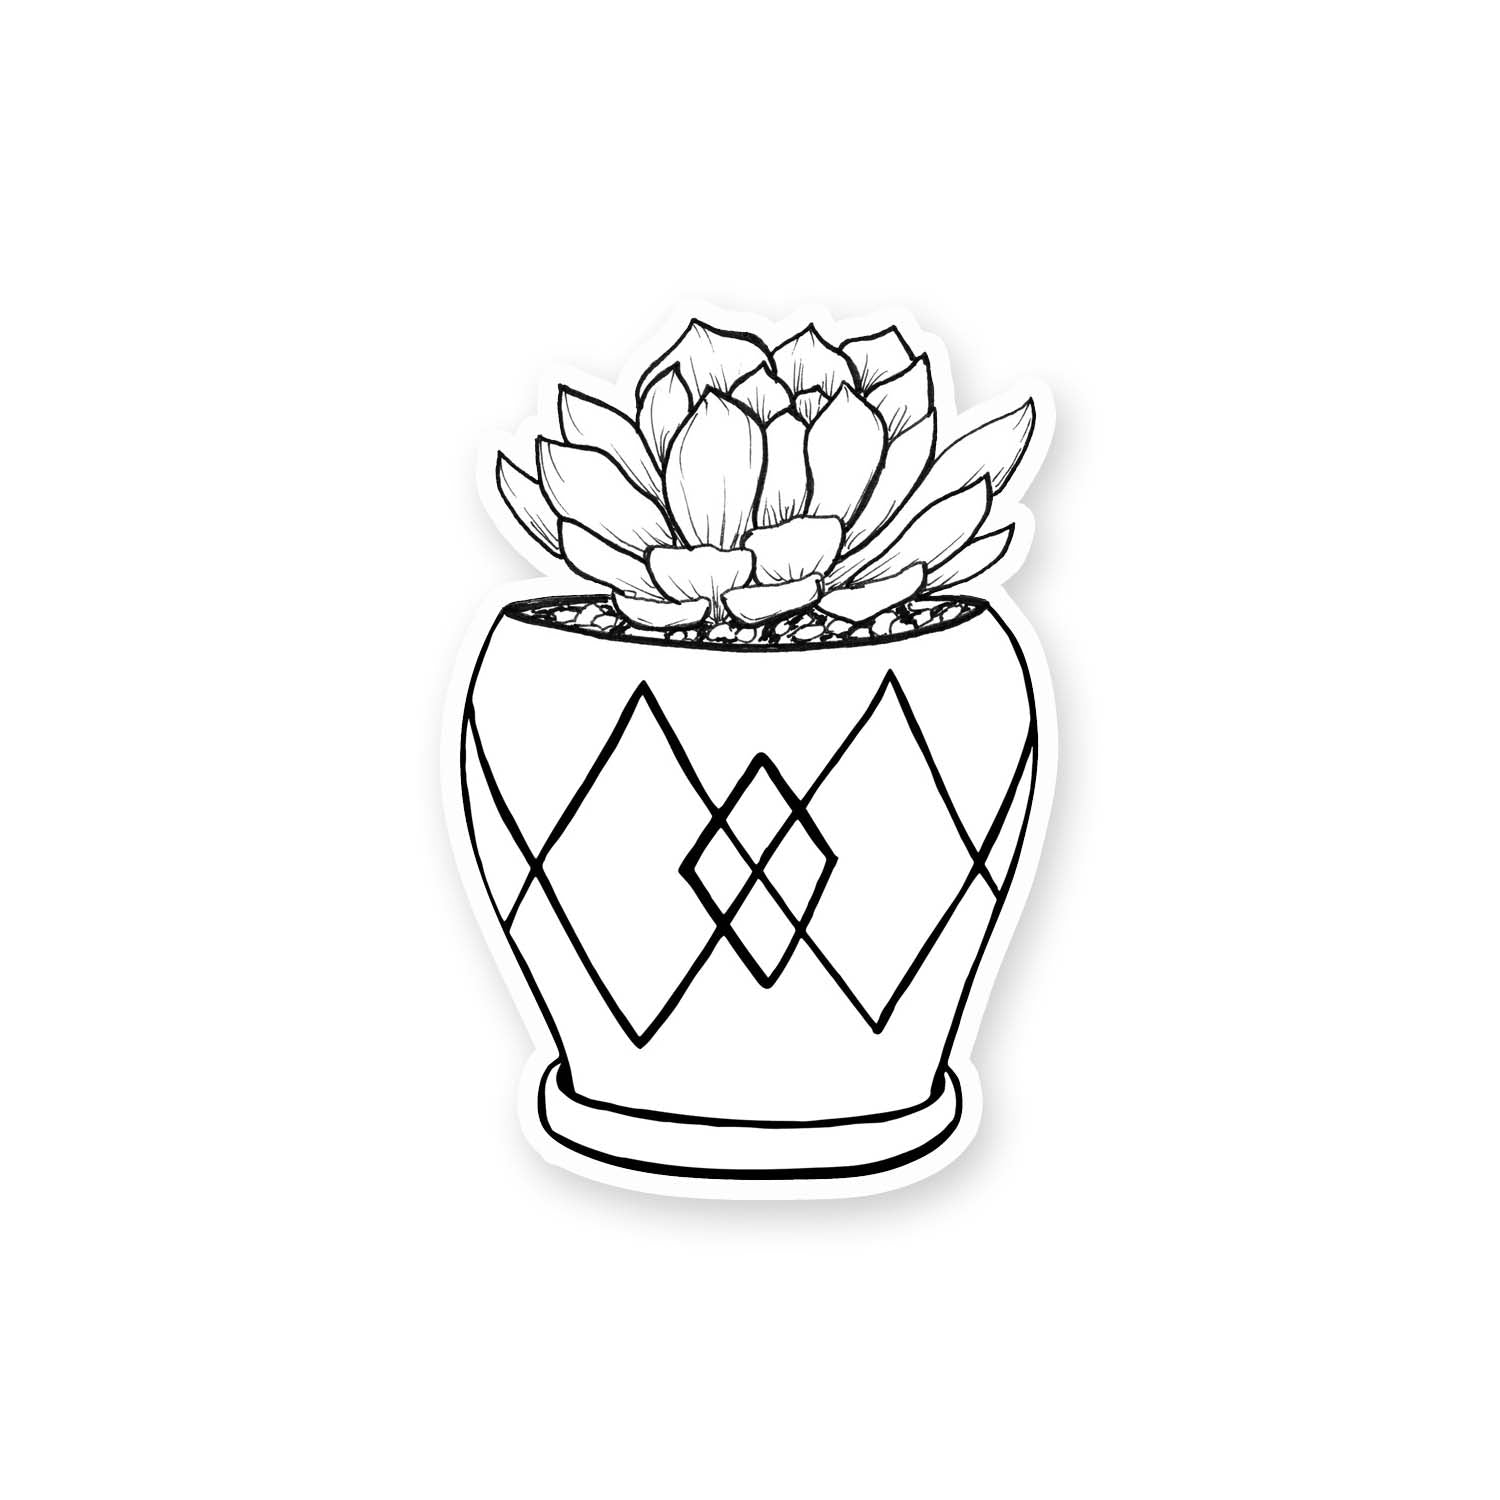 3" black and white hand illustration of a succulent plant in a mini pot